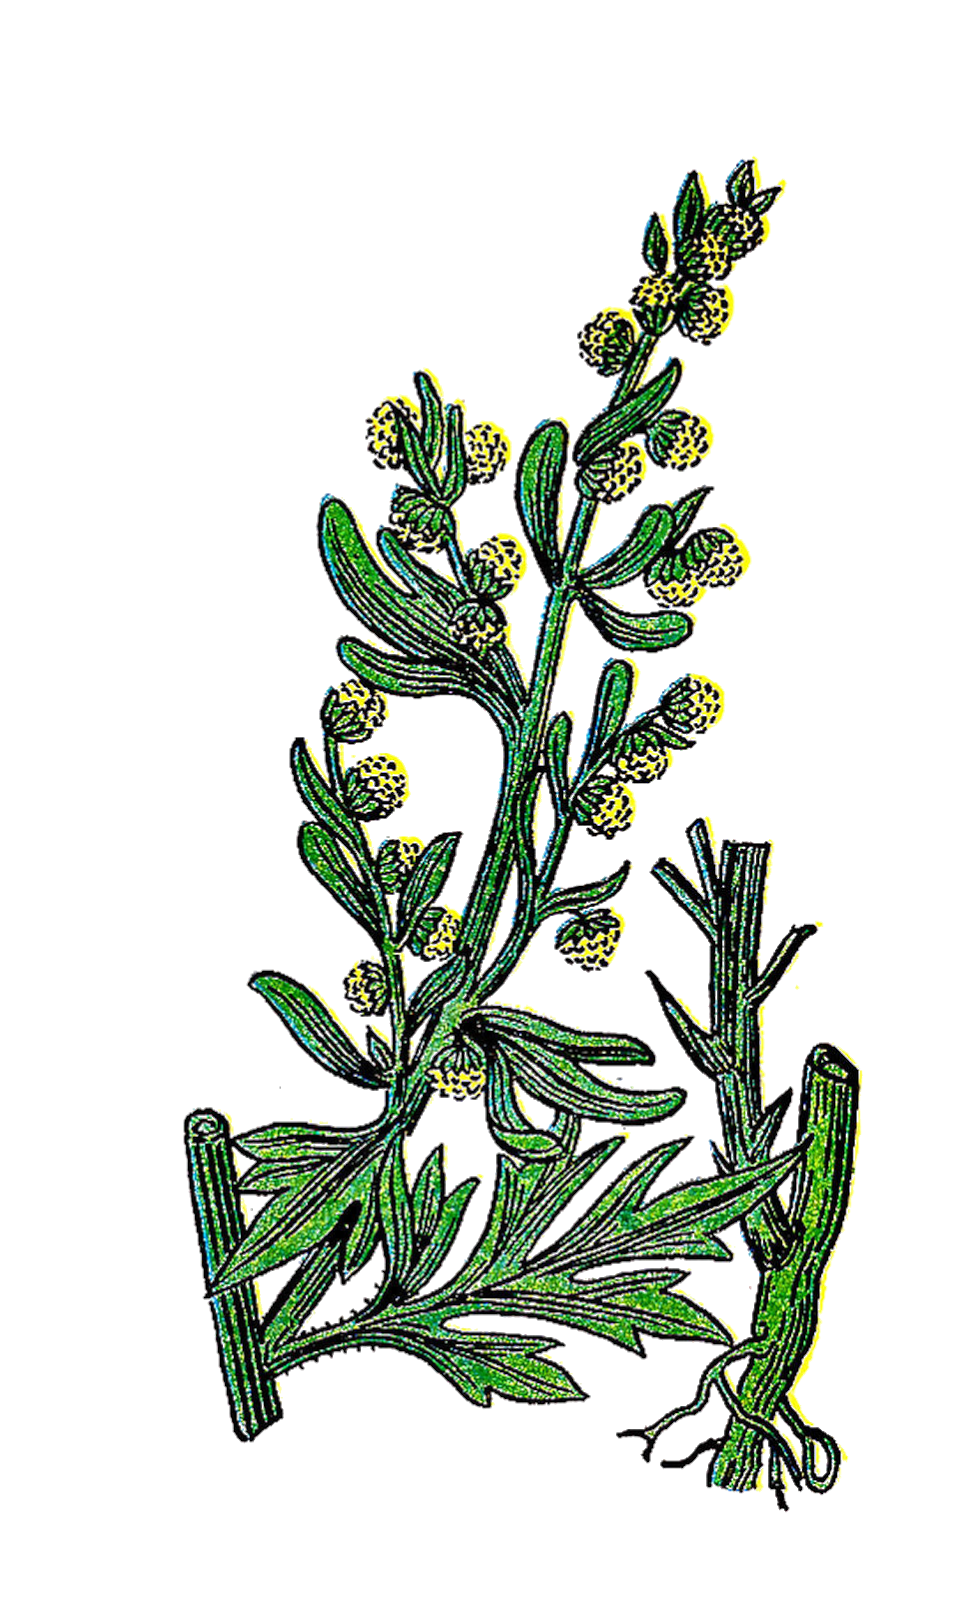 Vintage Graphic Of The Herb Plant Wormwood This Is From A Vintage